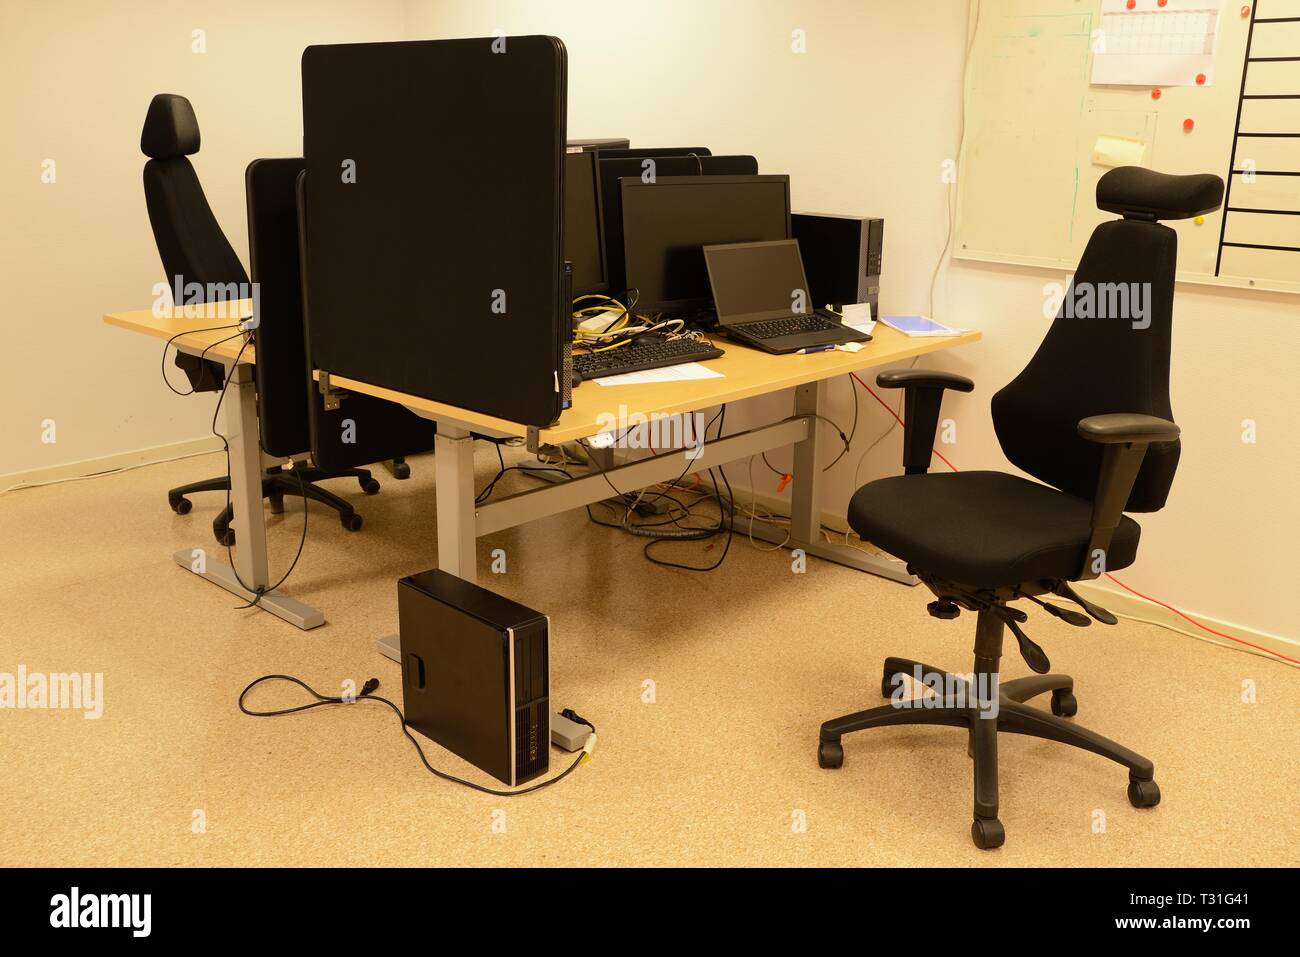 Empty office chairs in a row Stock Photo